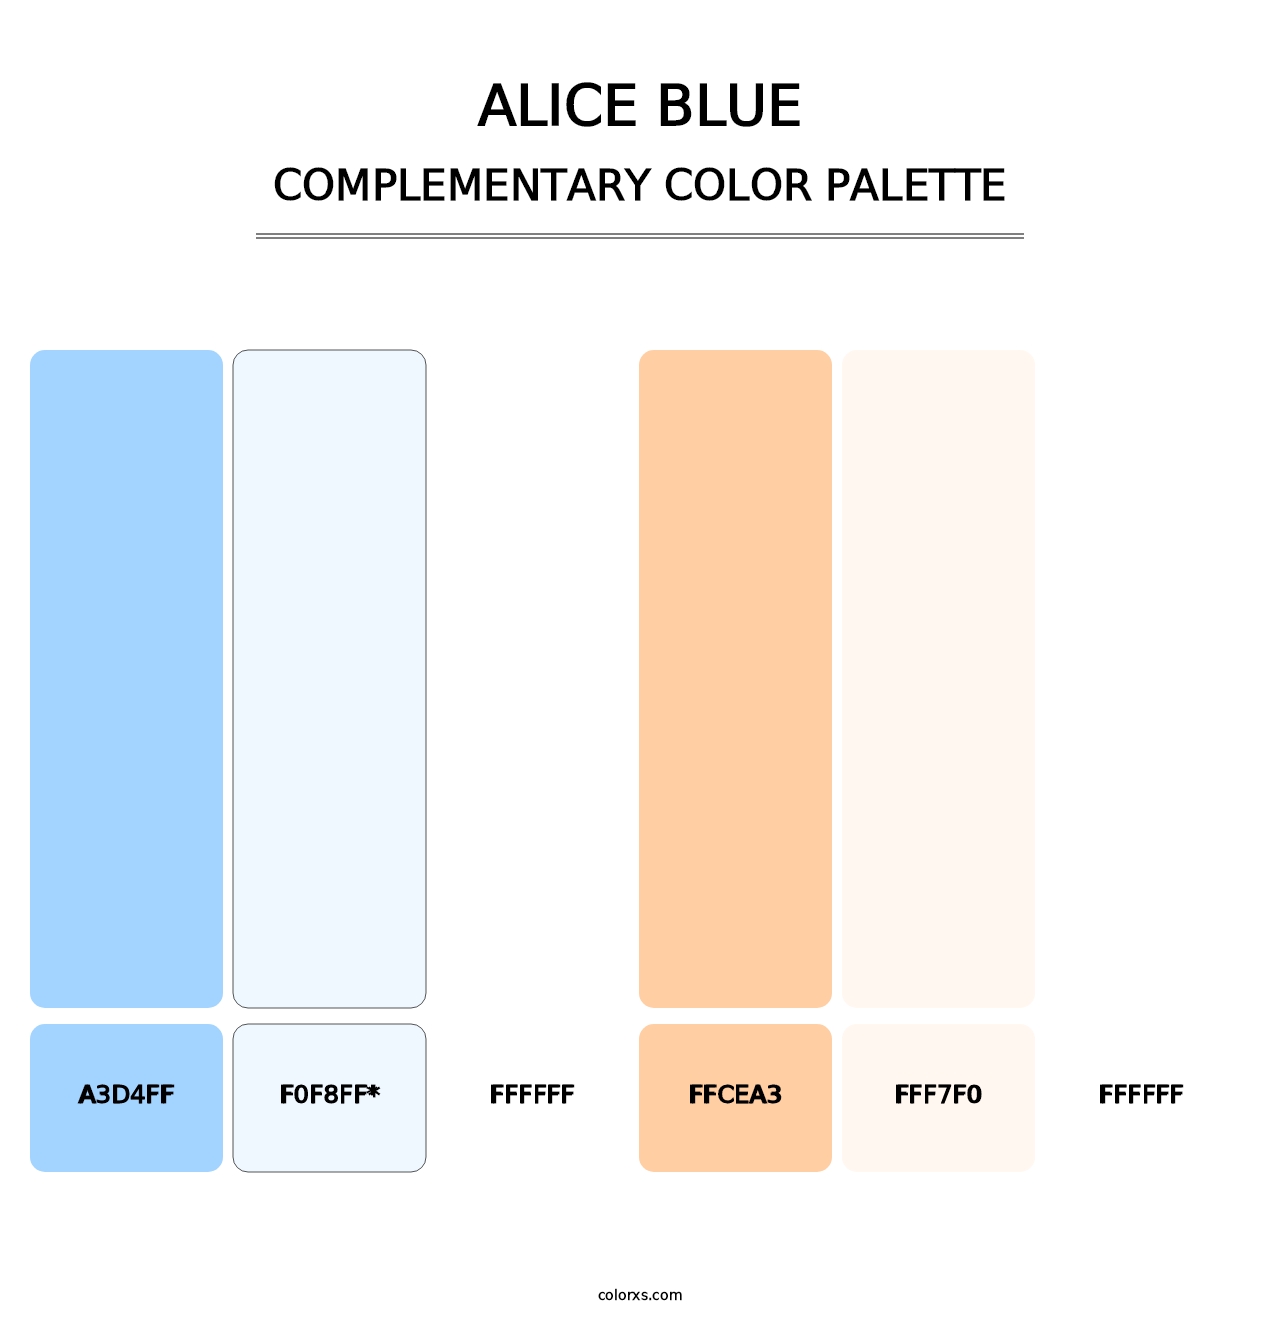 Alice blue - Complementary Color Palette